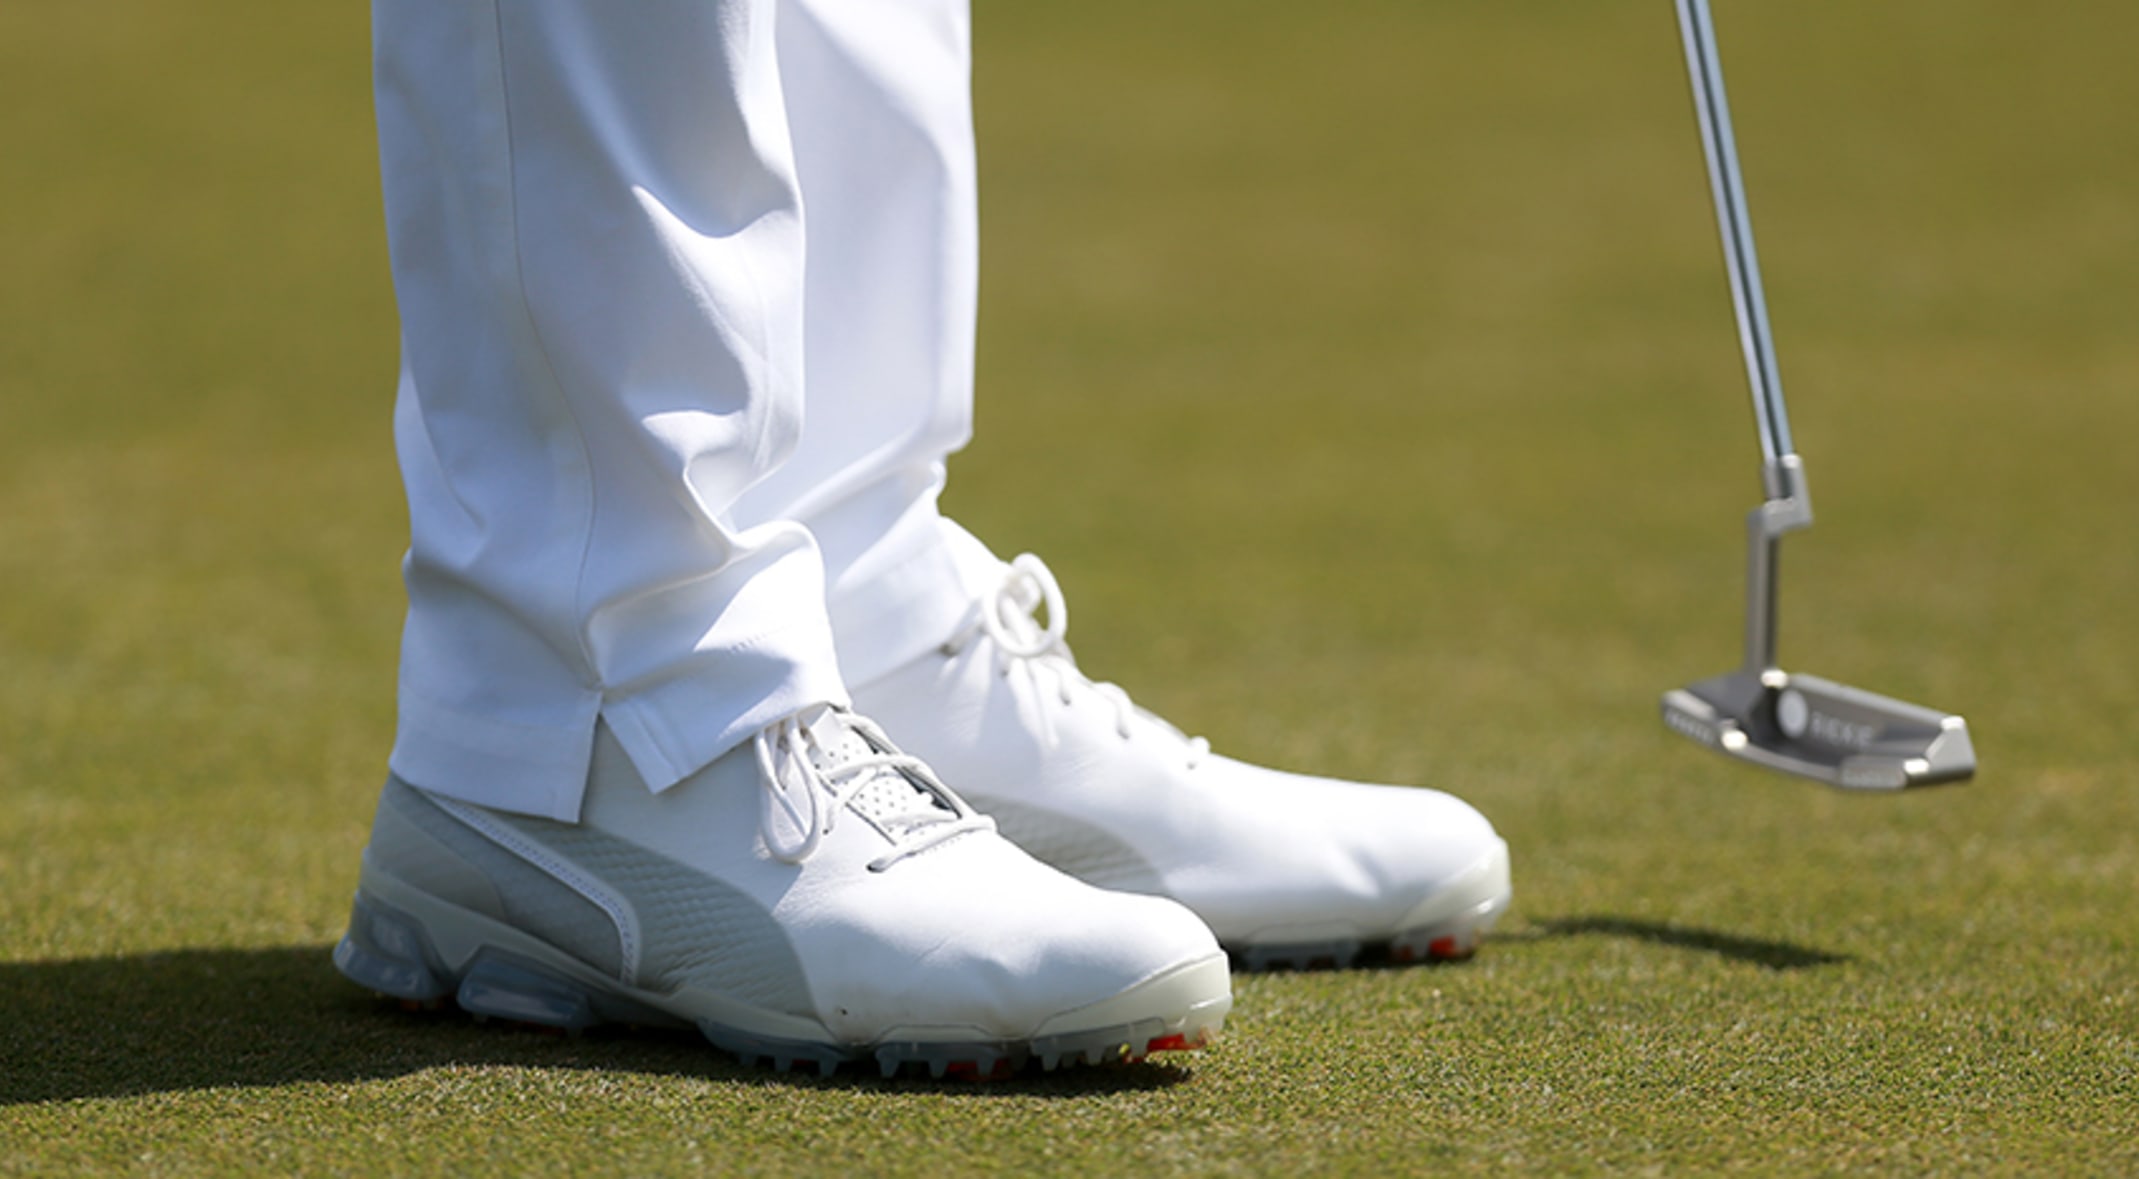 fowler golf shoes